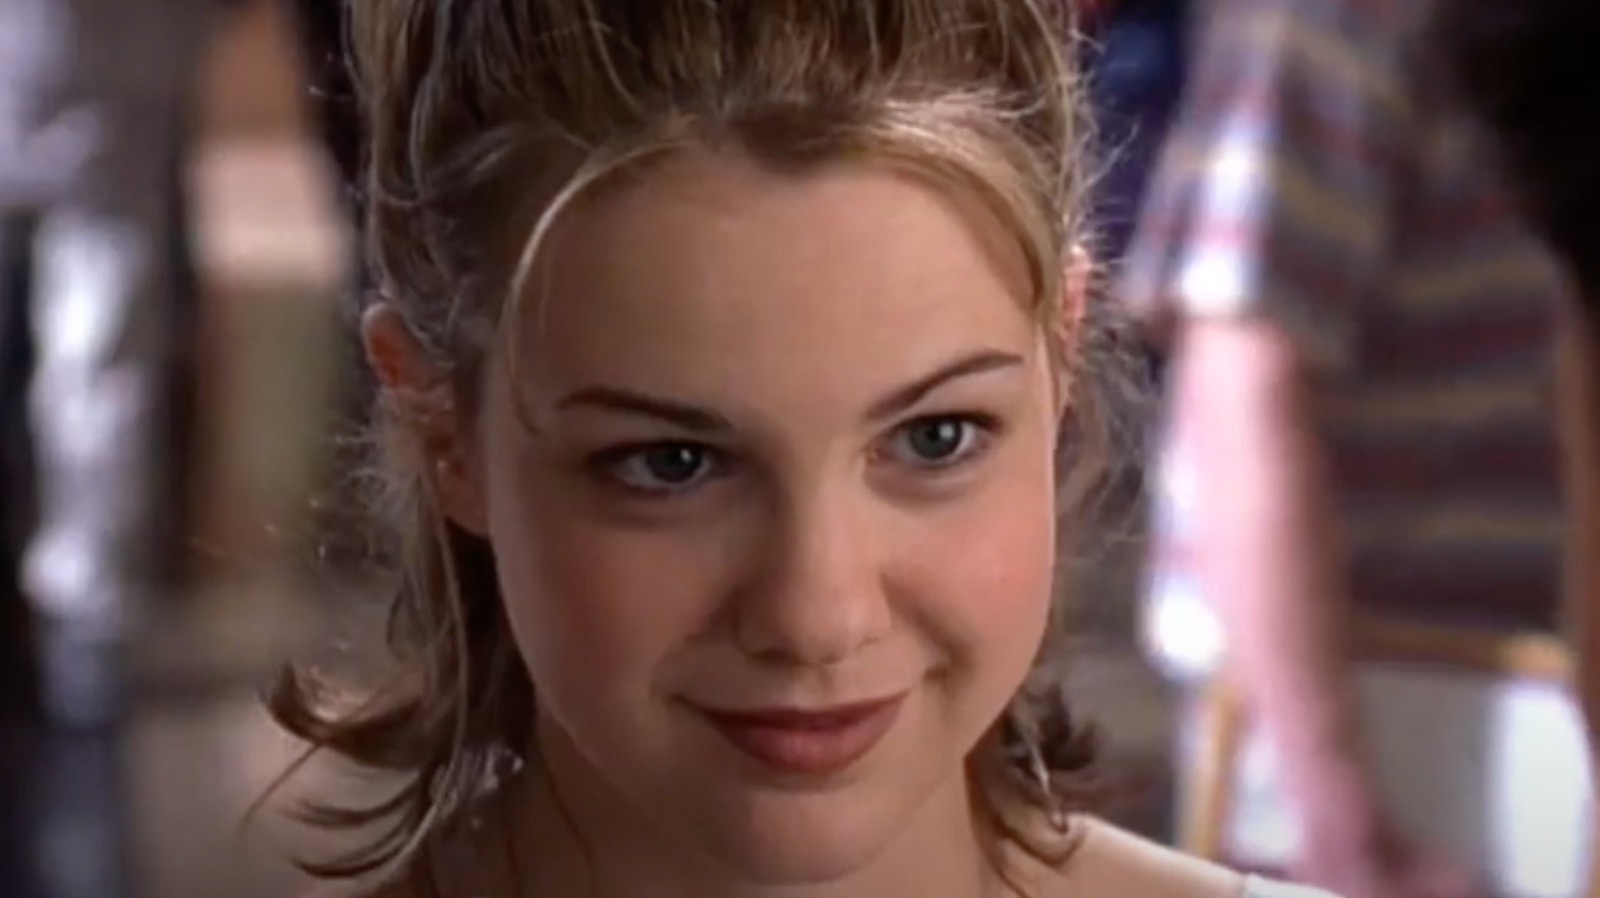 What Happened To The Actress Who Plays Bianca In 10 Things I Hate About You...